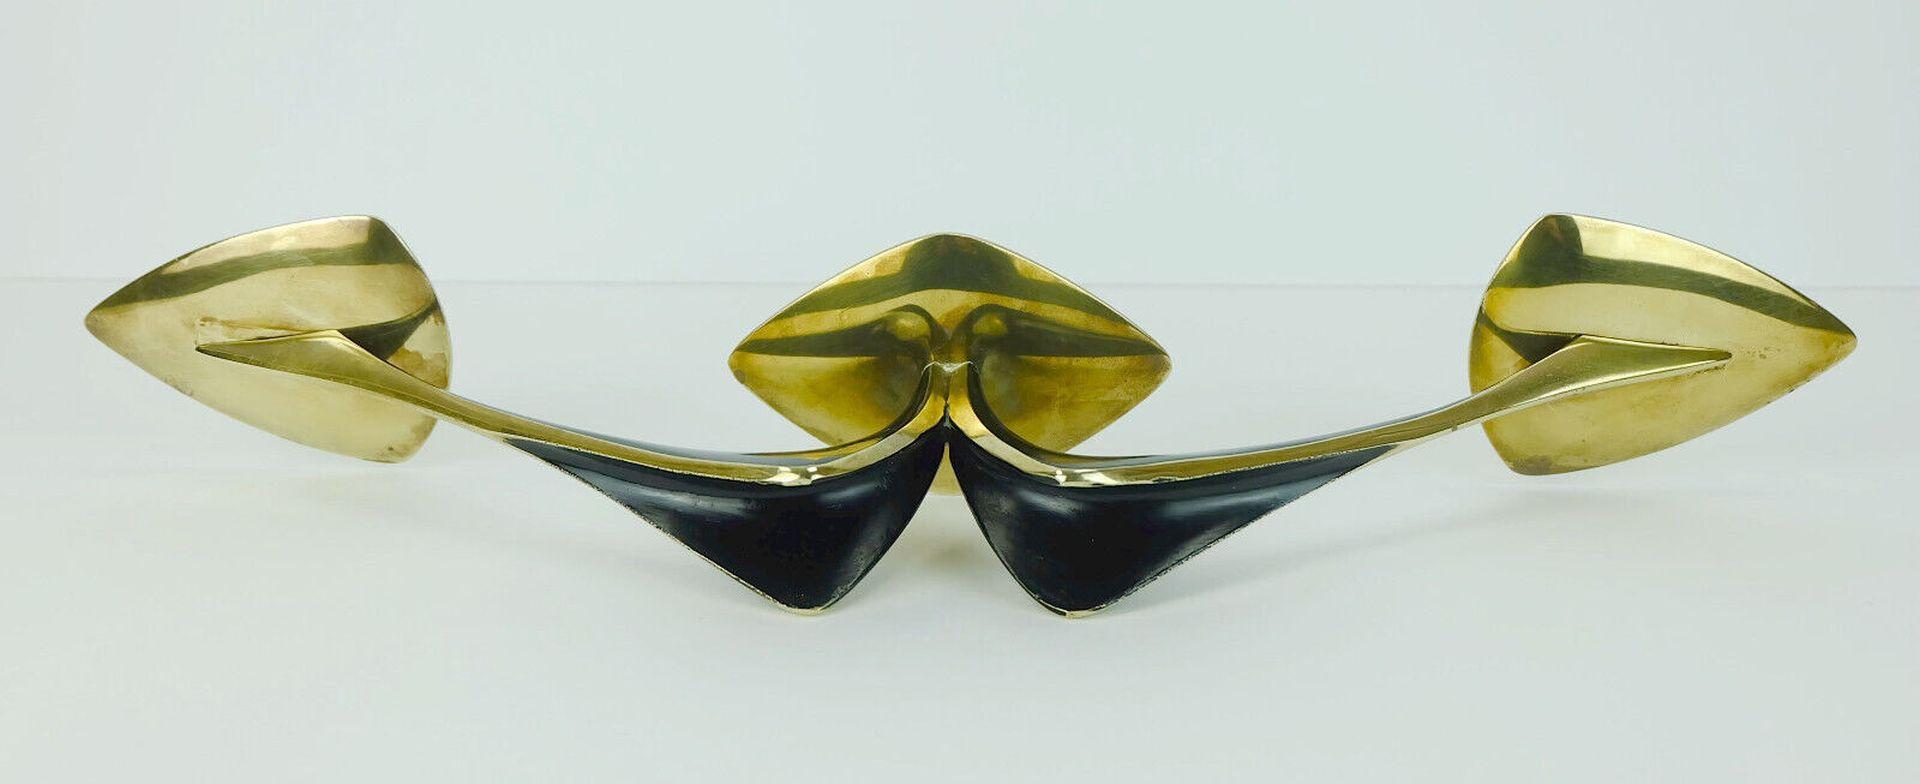 Mid-Century Modern candle holder designed by German goldsmith and Industrial designer Klaus Ullrich in 1958 and manufactured by Faber & Schumacher Duisburg. 
Made of brass, partially lacquered in matte black. Streamline design, a perfect addition